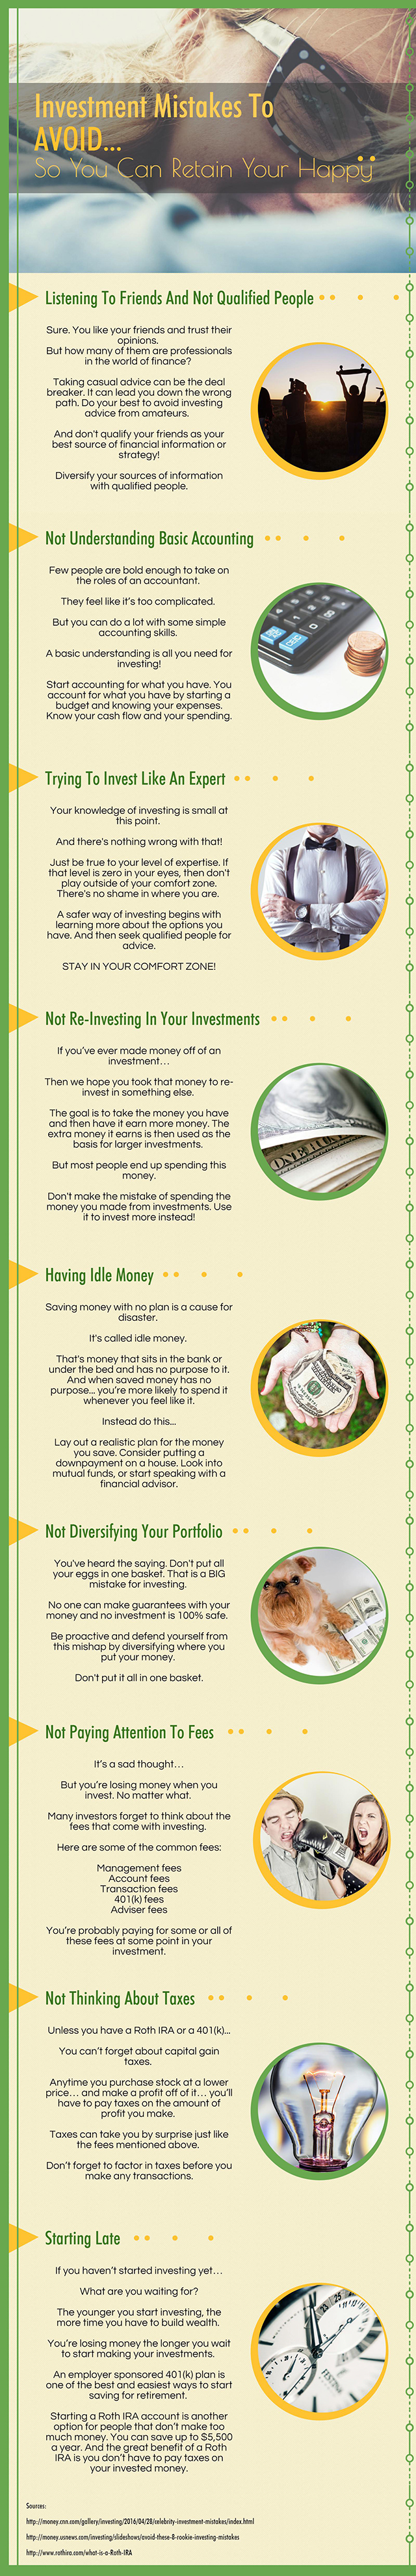 Investment Mistakes To Avoid-Infographic